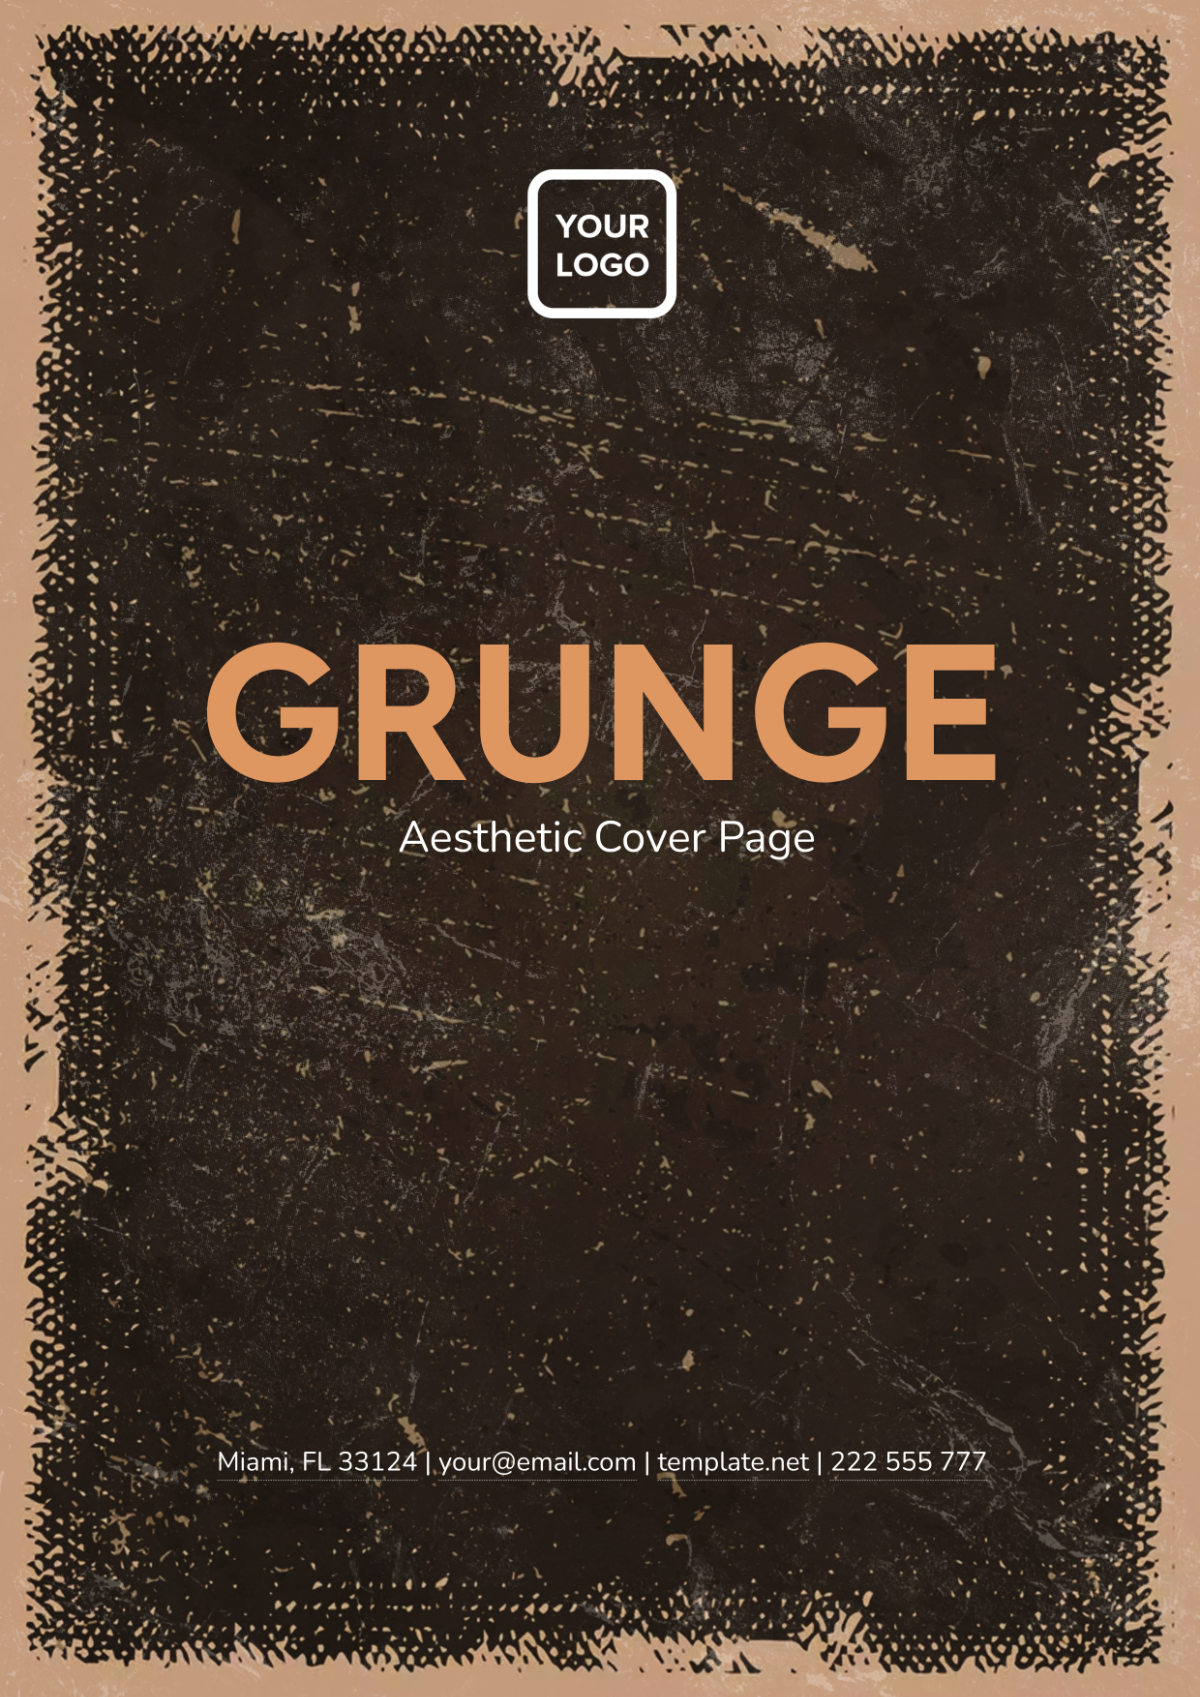 Grunge Aesthetic Cover Page